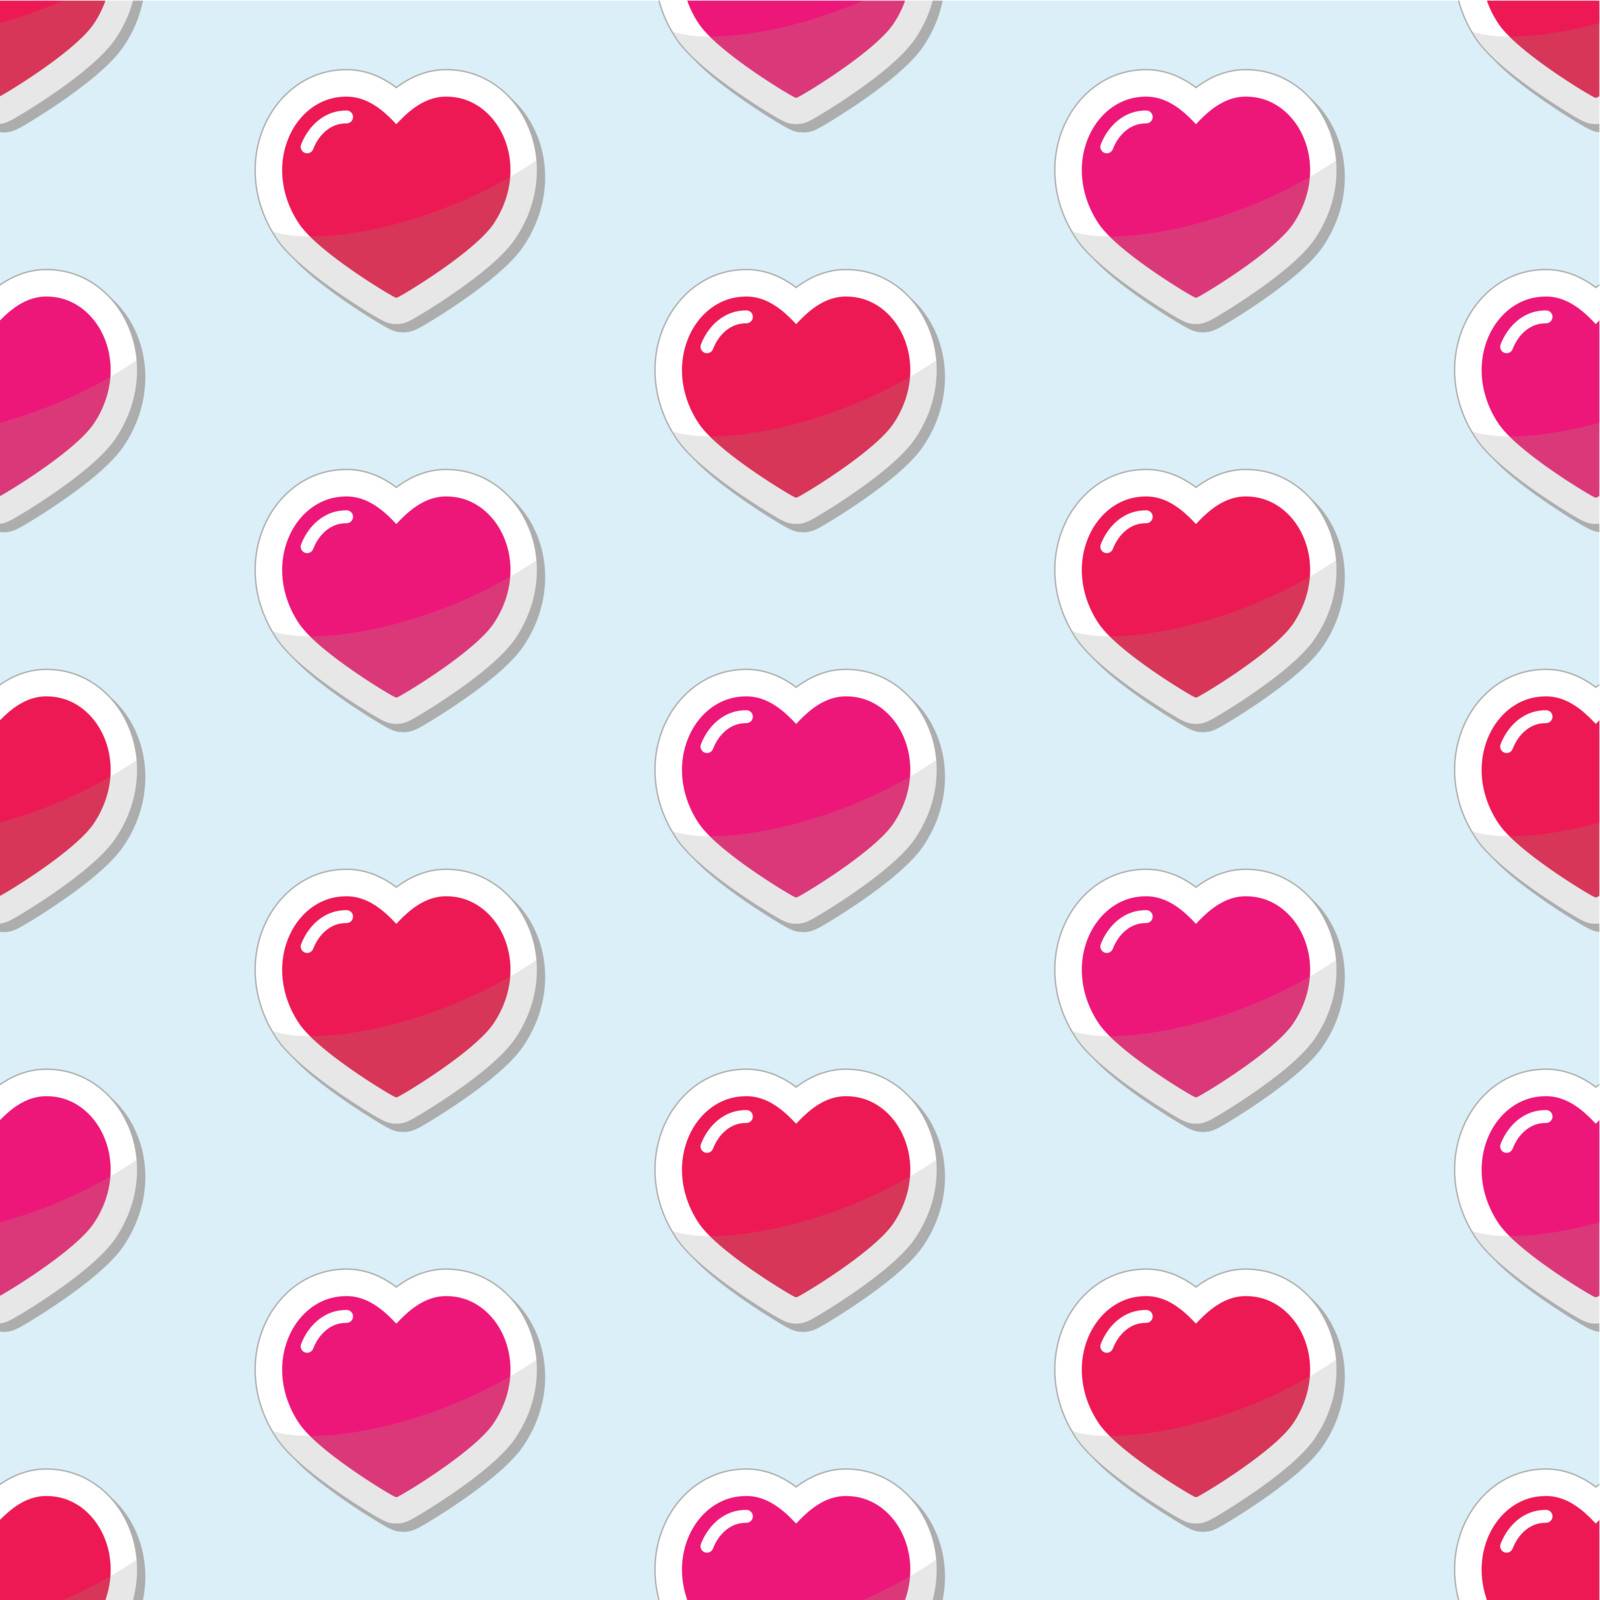 Red and pink hearts on blue background wallpaper